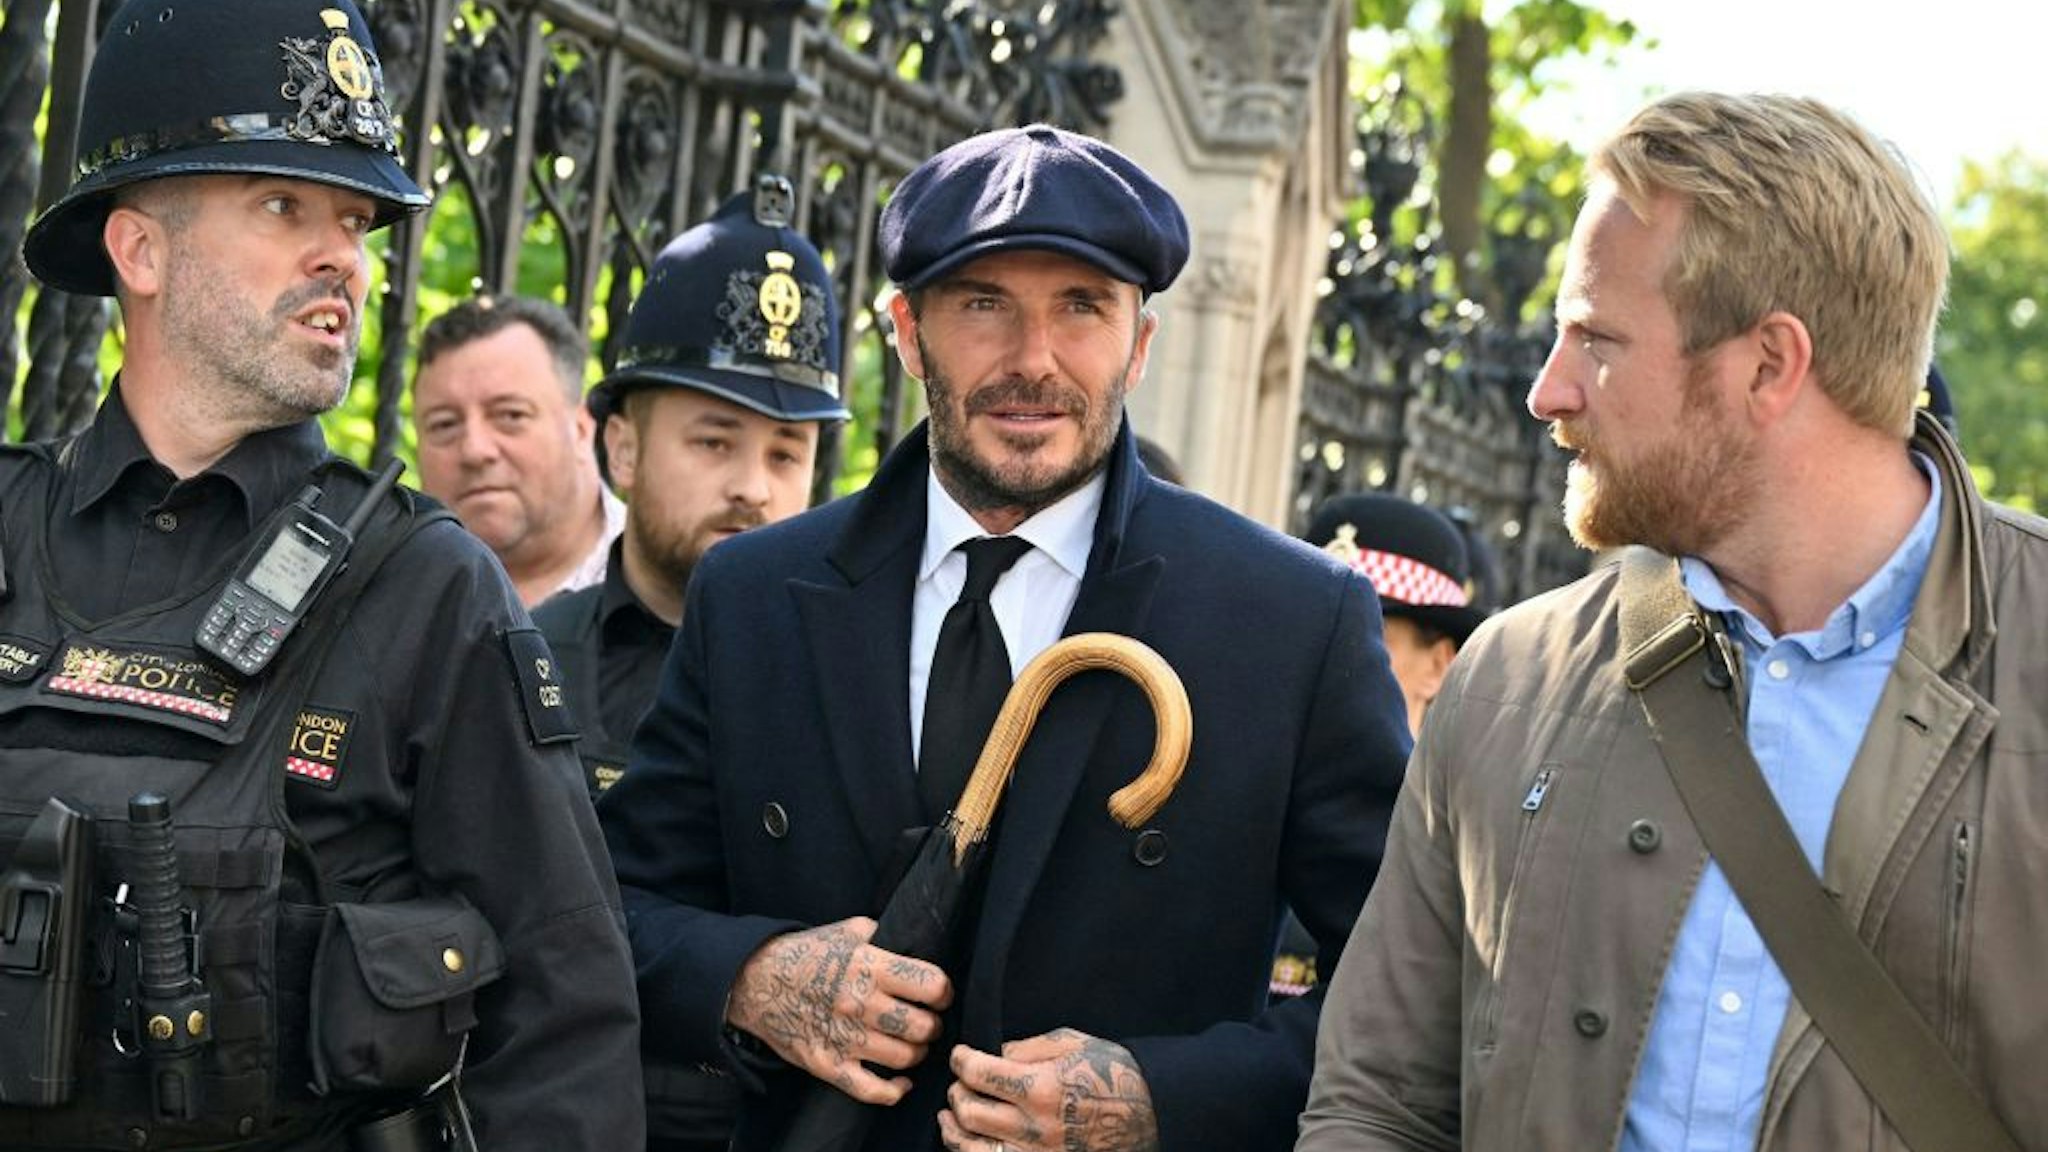 English former football player David Beckham leaves Westminster Hall, at the Palace of Westminster, in London on September 16, 2022 after paying his respects to the coffin of Queen Elizabeth II as it Lies in State. - Queen Elizabeth II will lie in state in Westminster Hall inside the Palace of Westminster, until 0530 GMT on September 19, a few hours before her funeral, with huge queues expected to file past her coffin to pay their respects. (Photo by Louisa Gouliamaki / AFP) (Photo by LOUISA GOULIAMAKI/AFP via Getty Images)